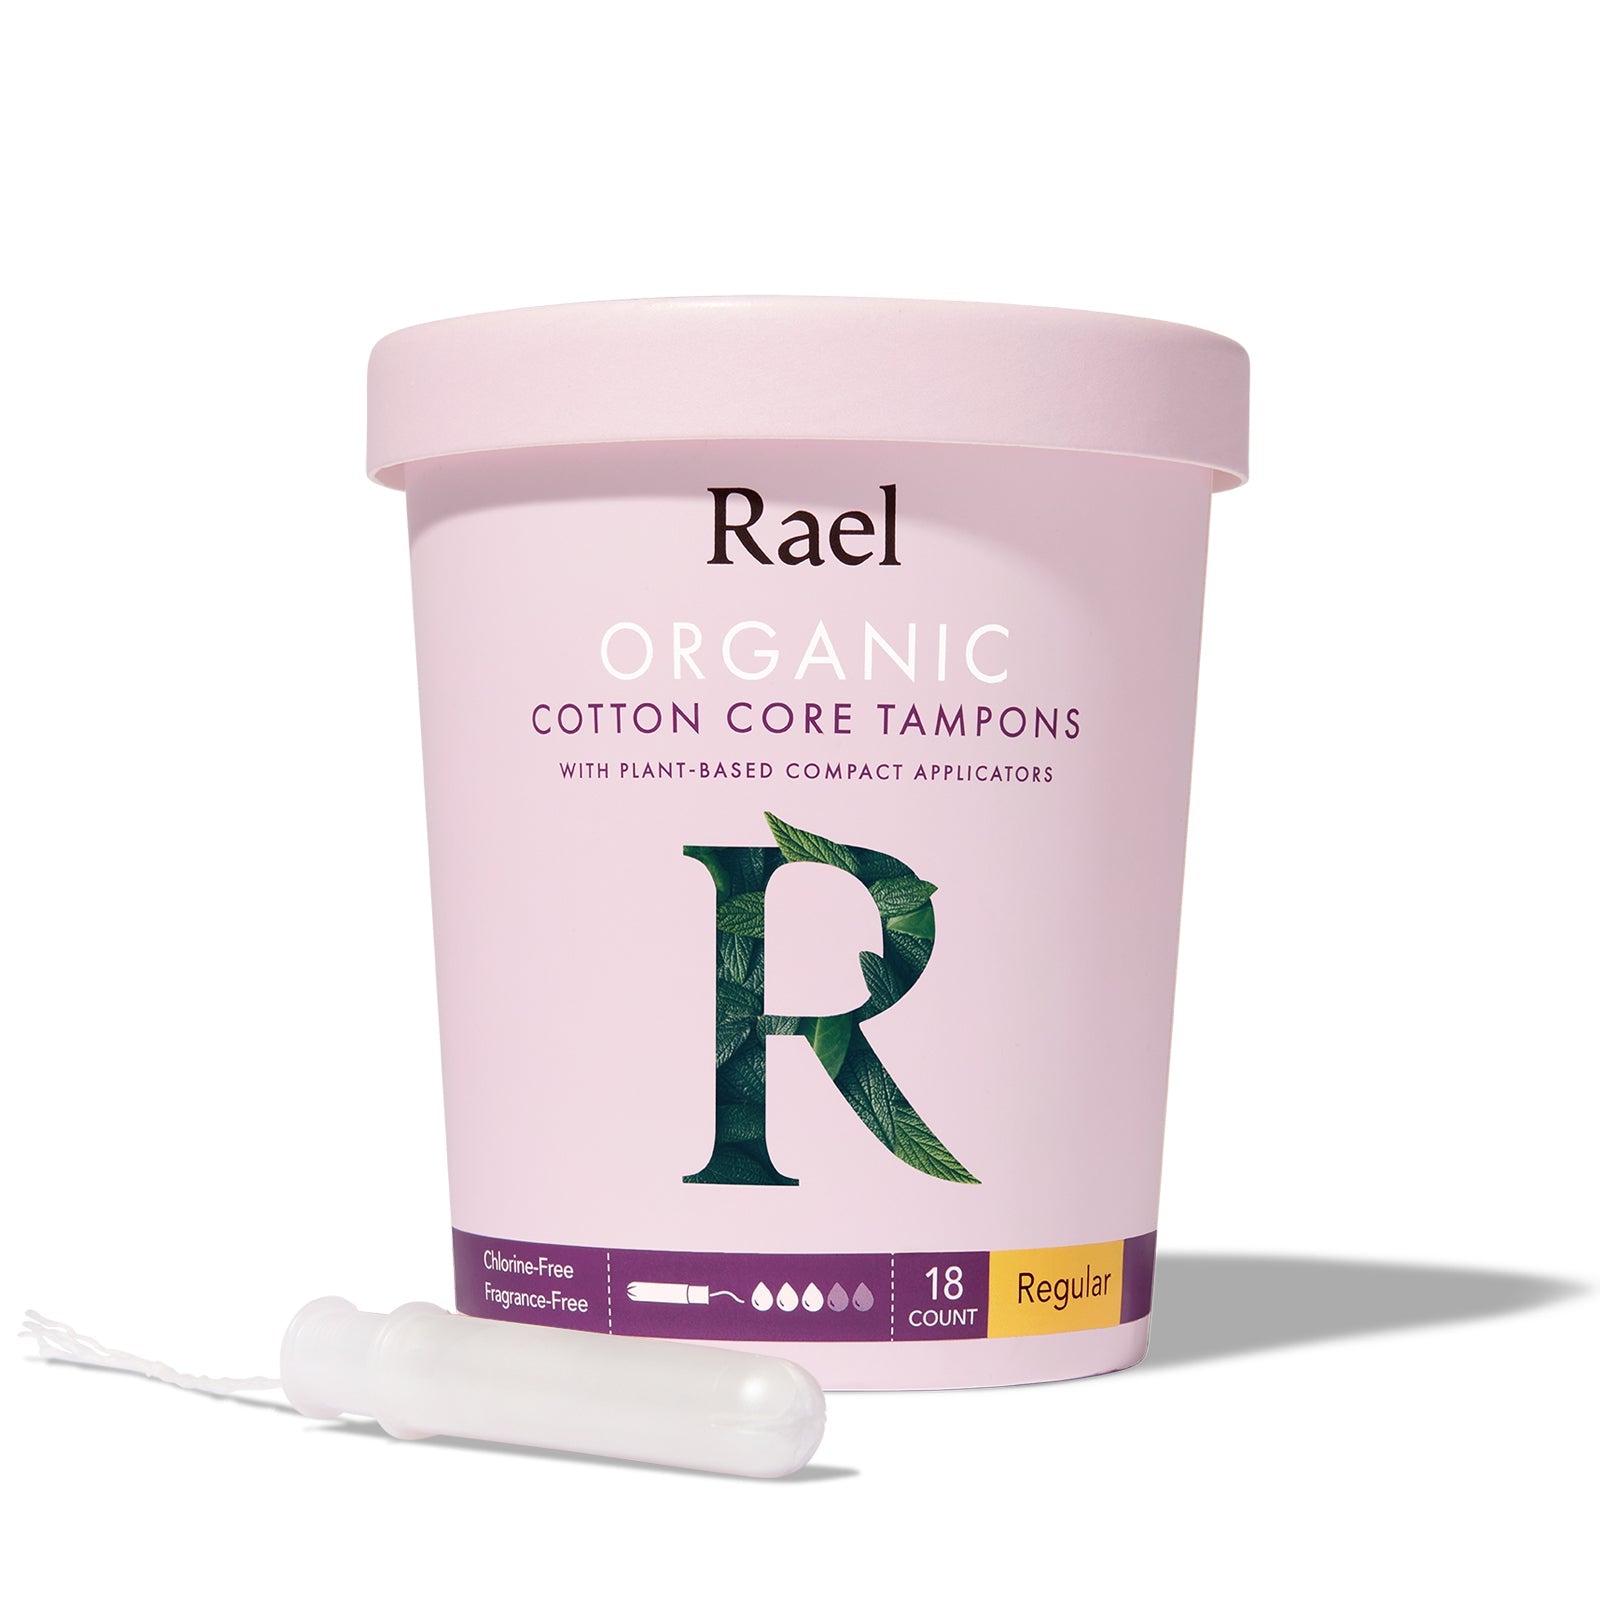 Rael Regular Organic Cotton Tampons with Plant-based Compact Applicator 18s